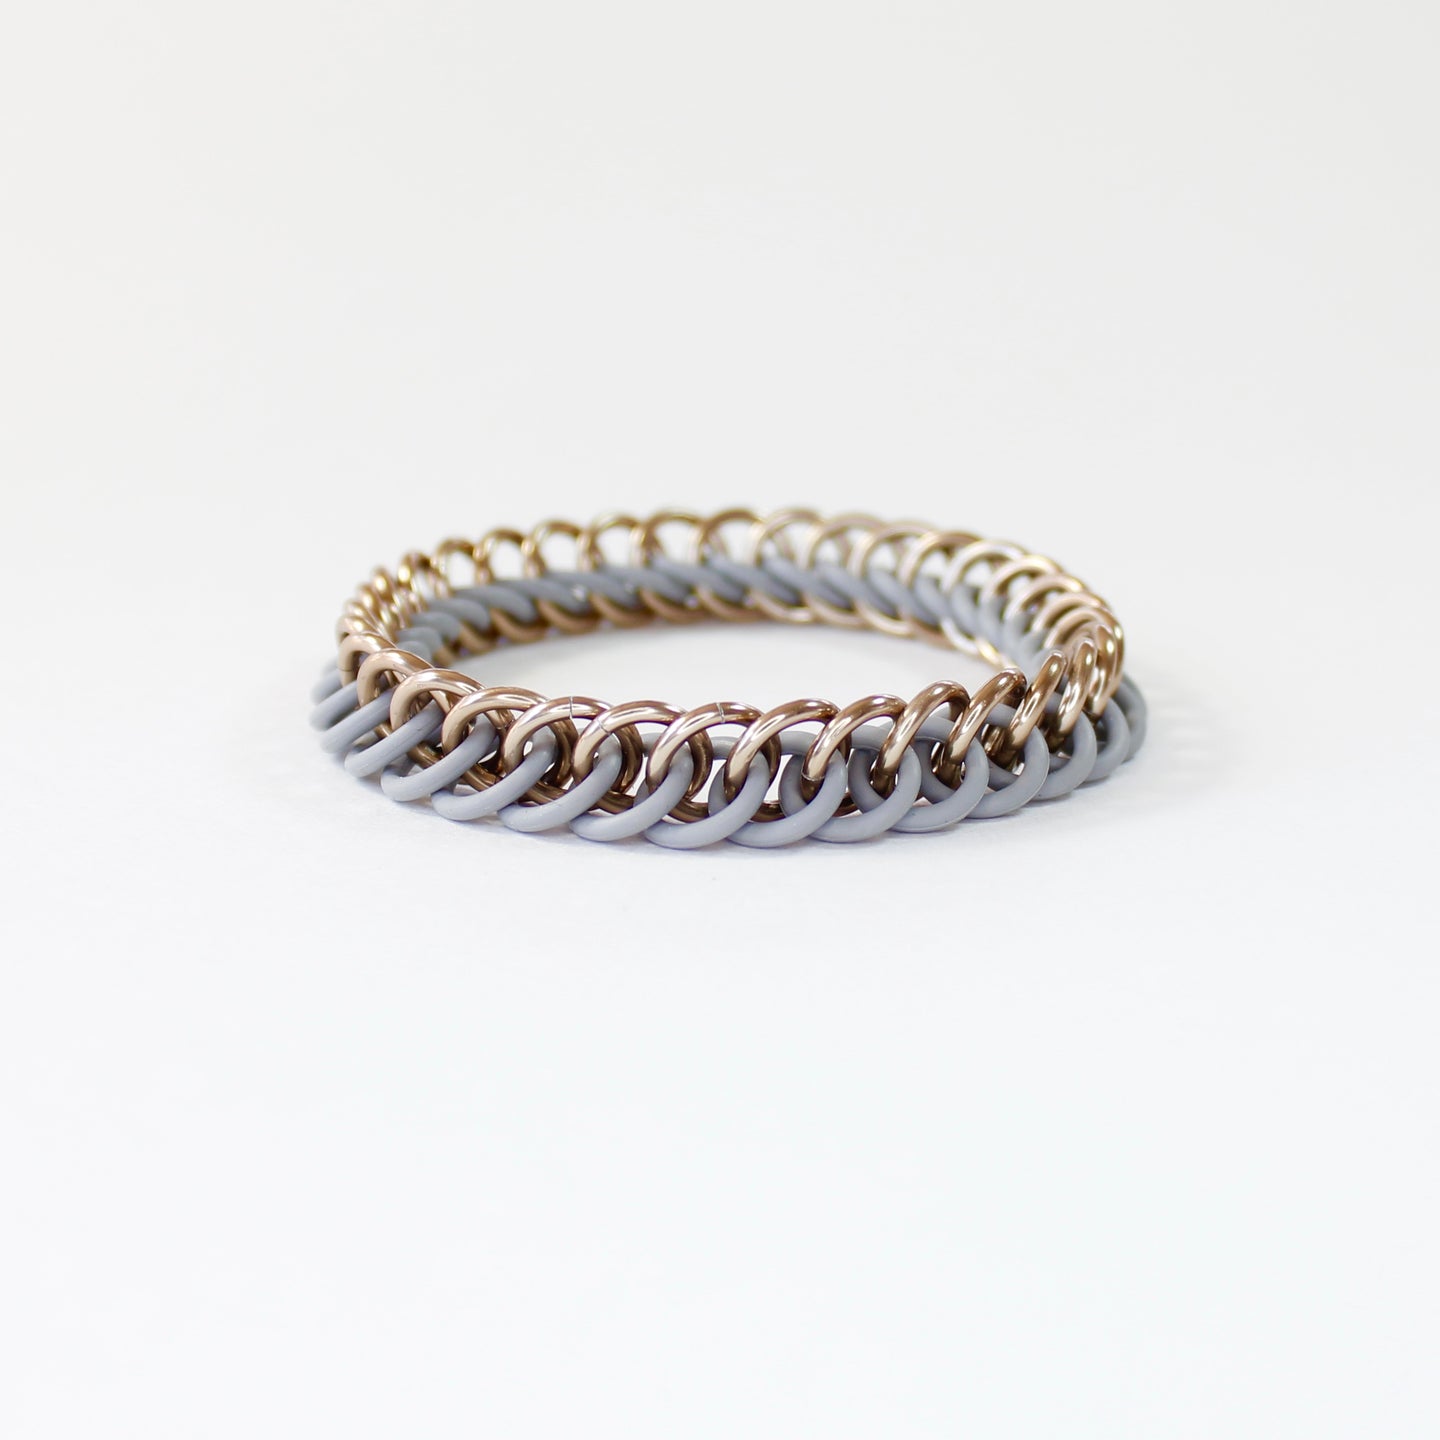 The Persian Stretch Bracelet in Grey + Champagne